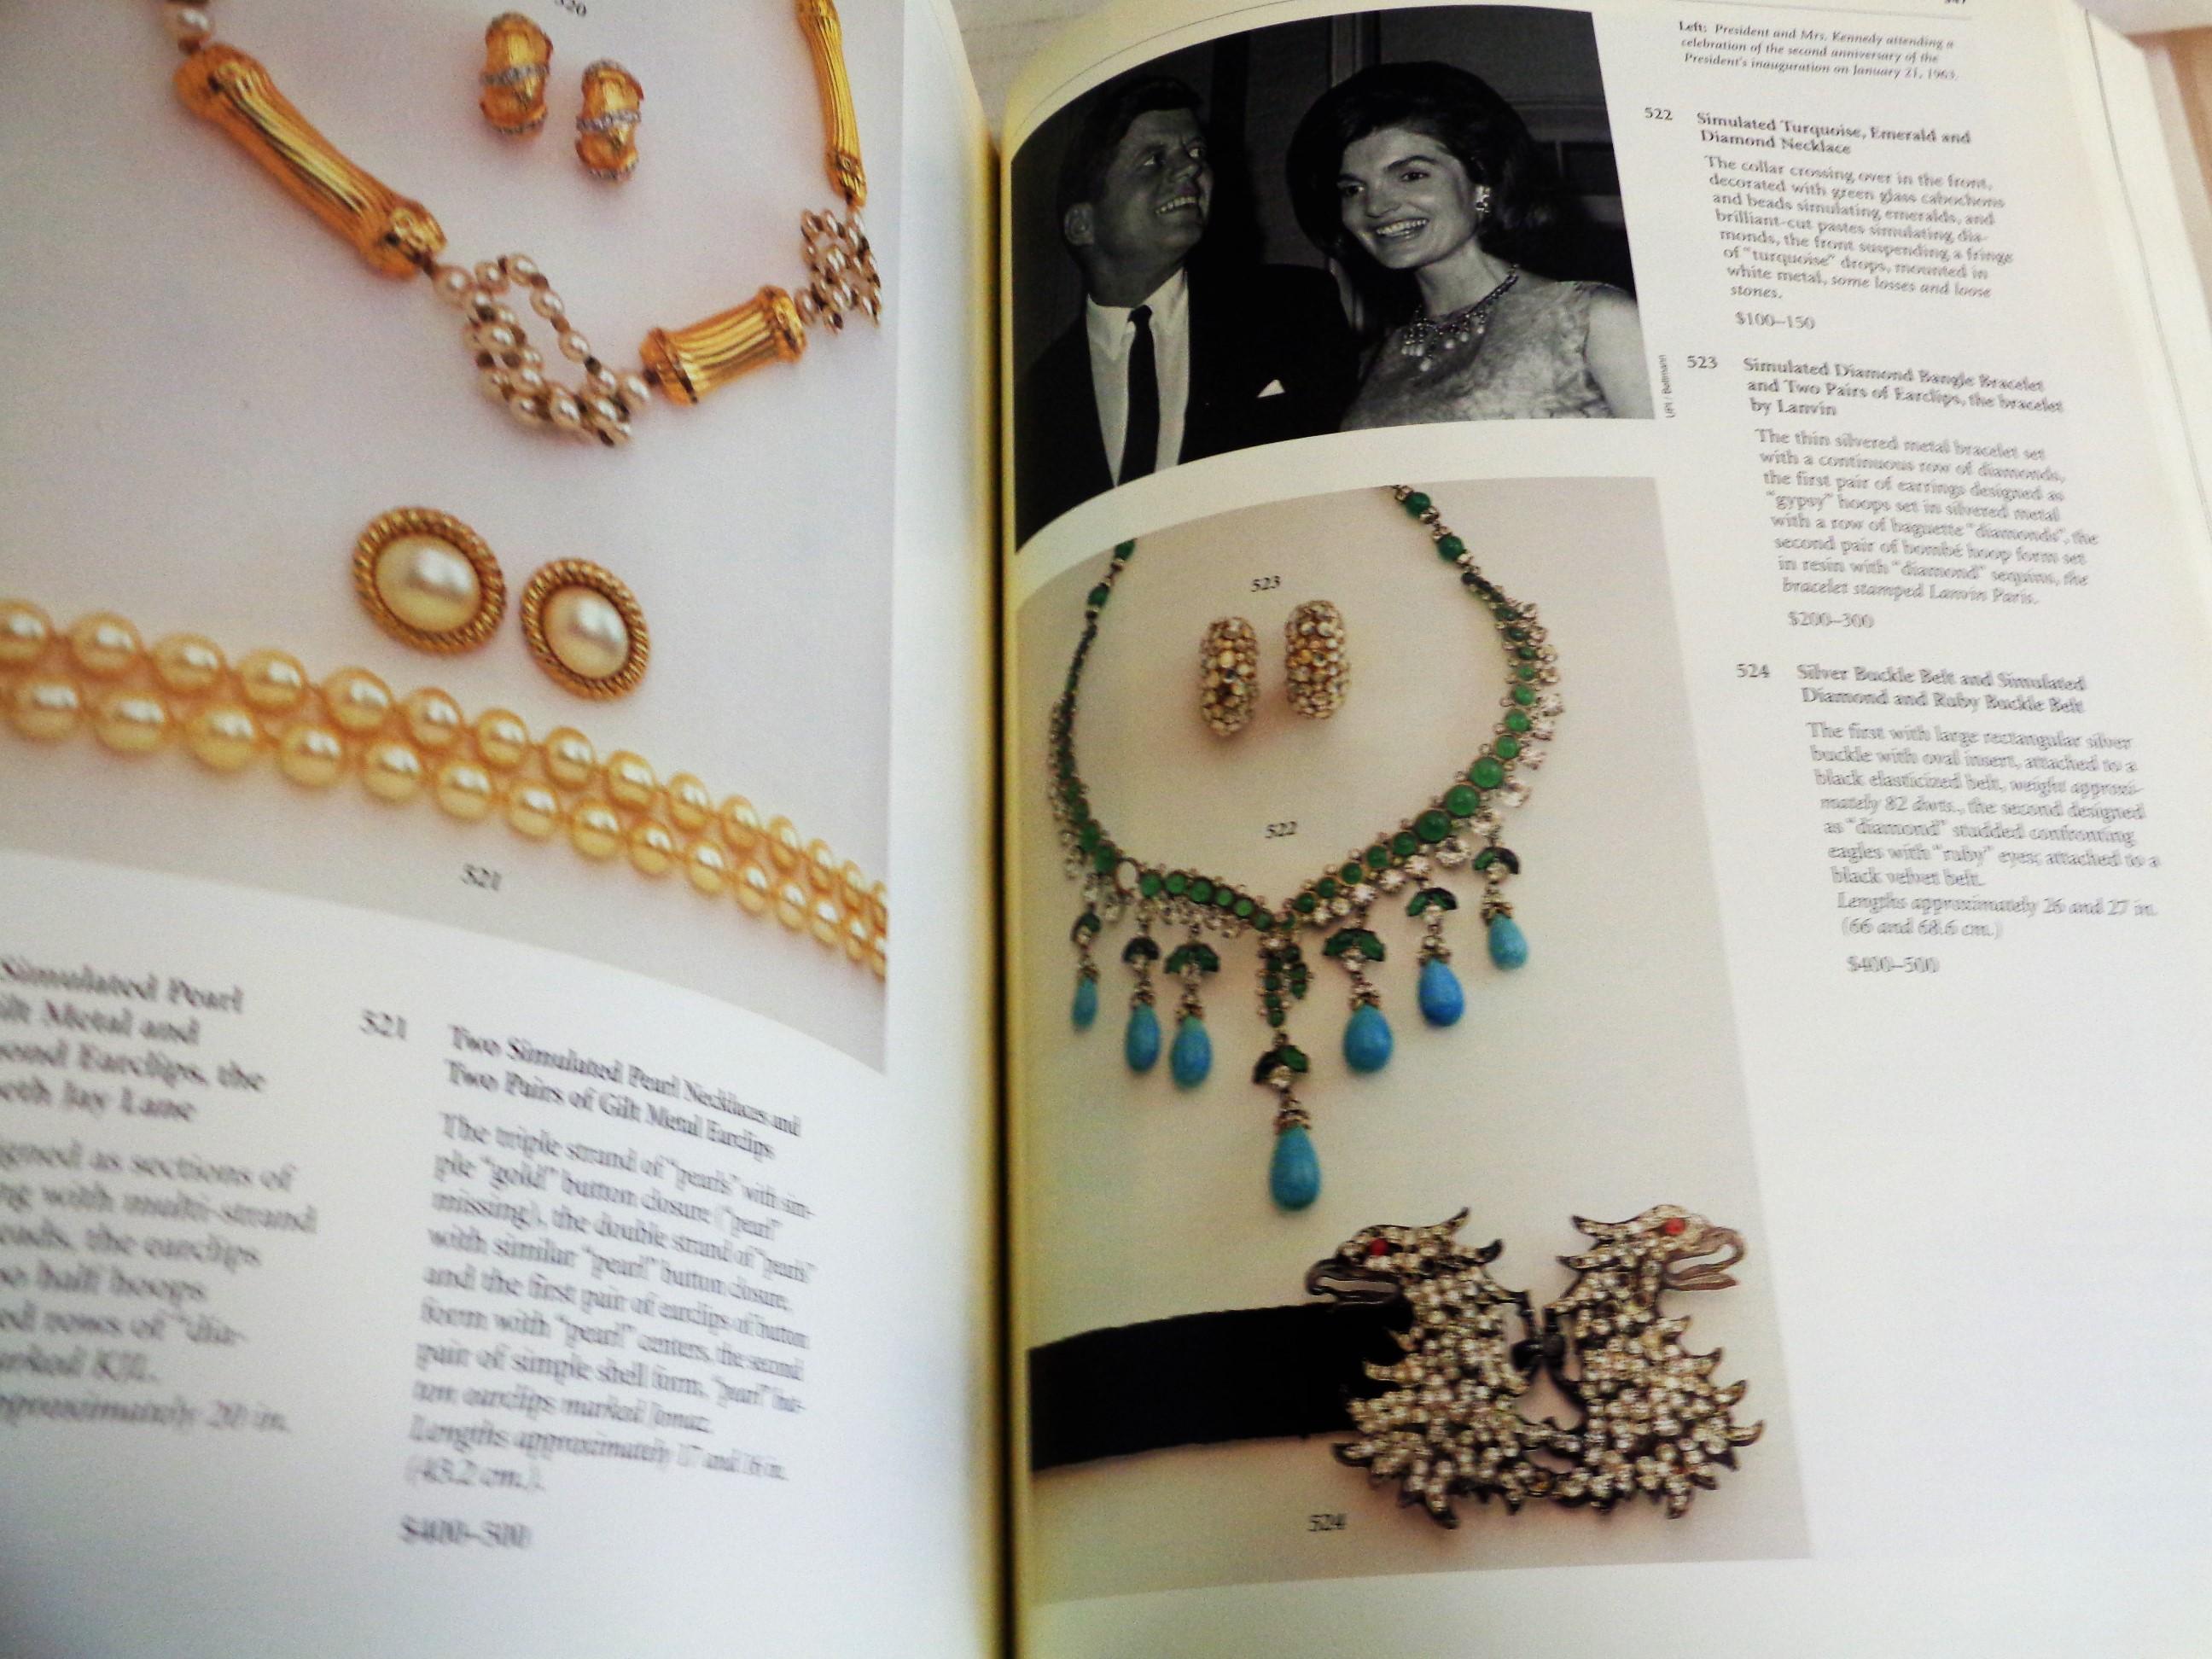 The Estate Of Jacqueline Kennedy Onassis: 1996 Sotheby's NY Auction Catalog  7